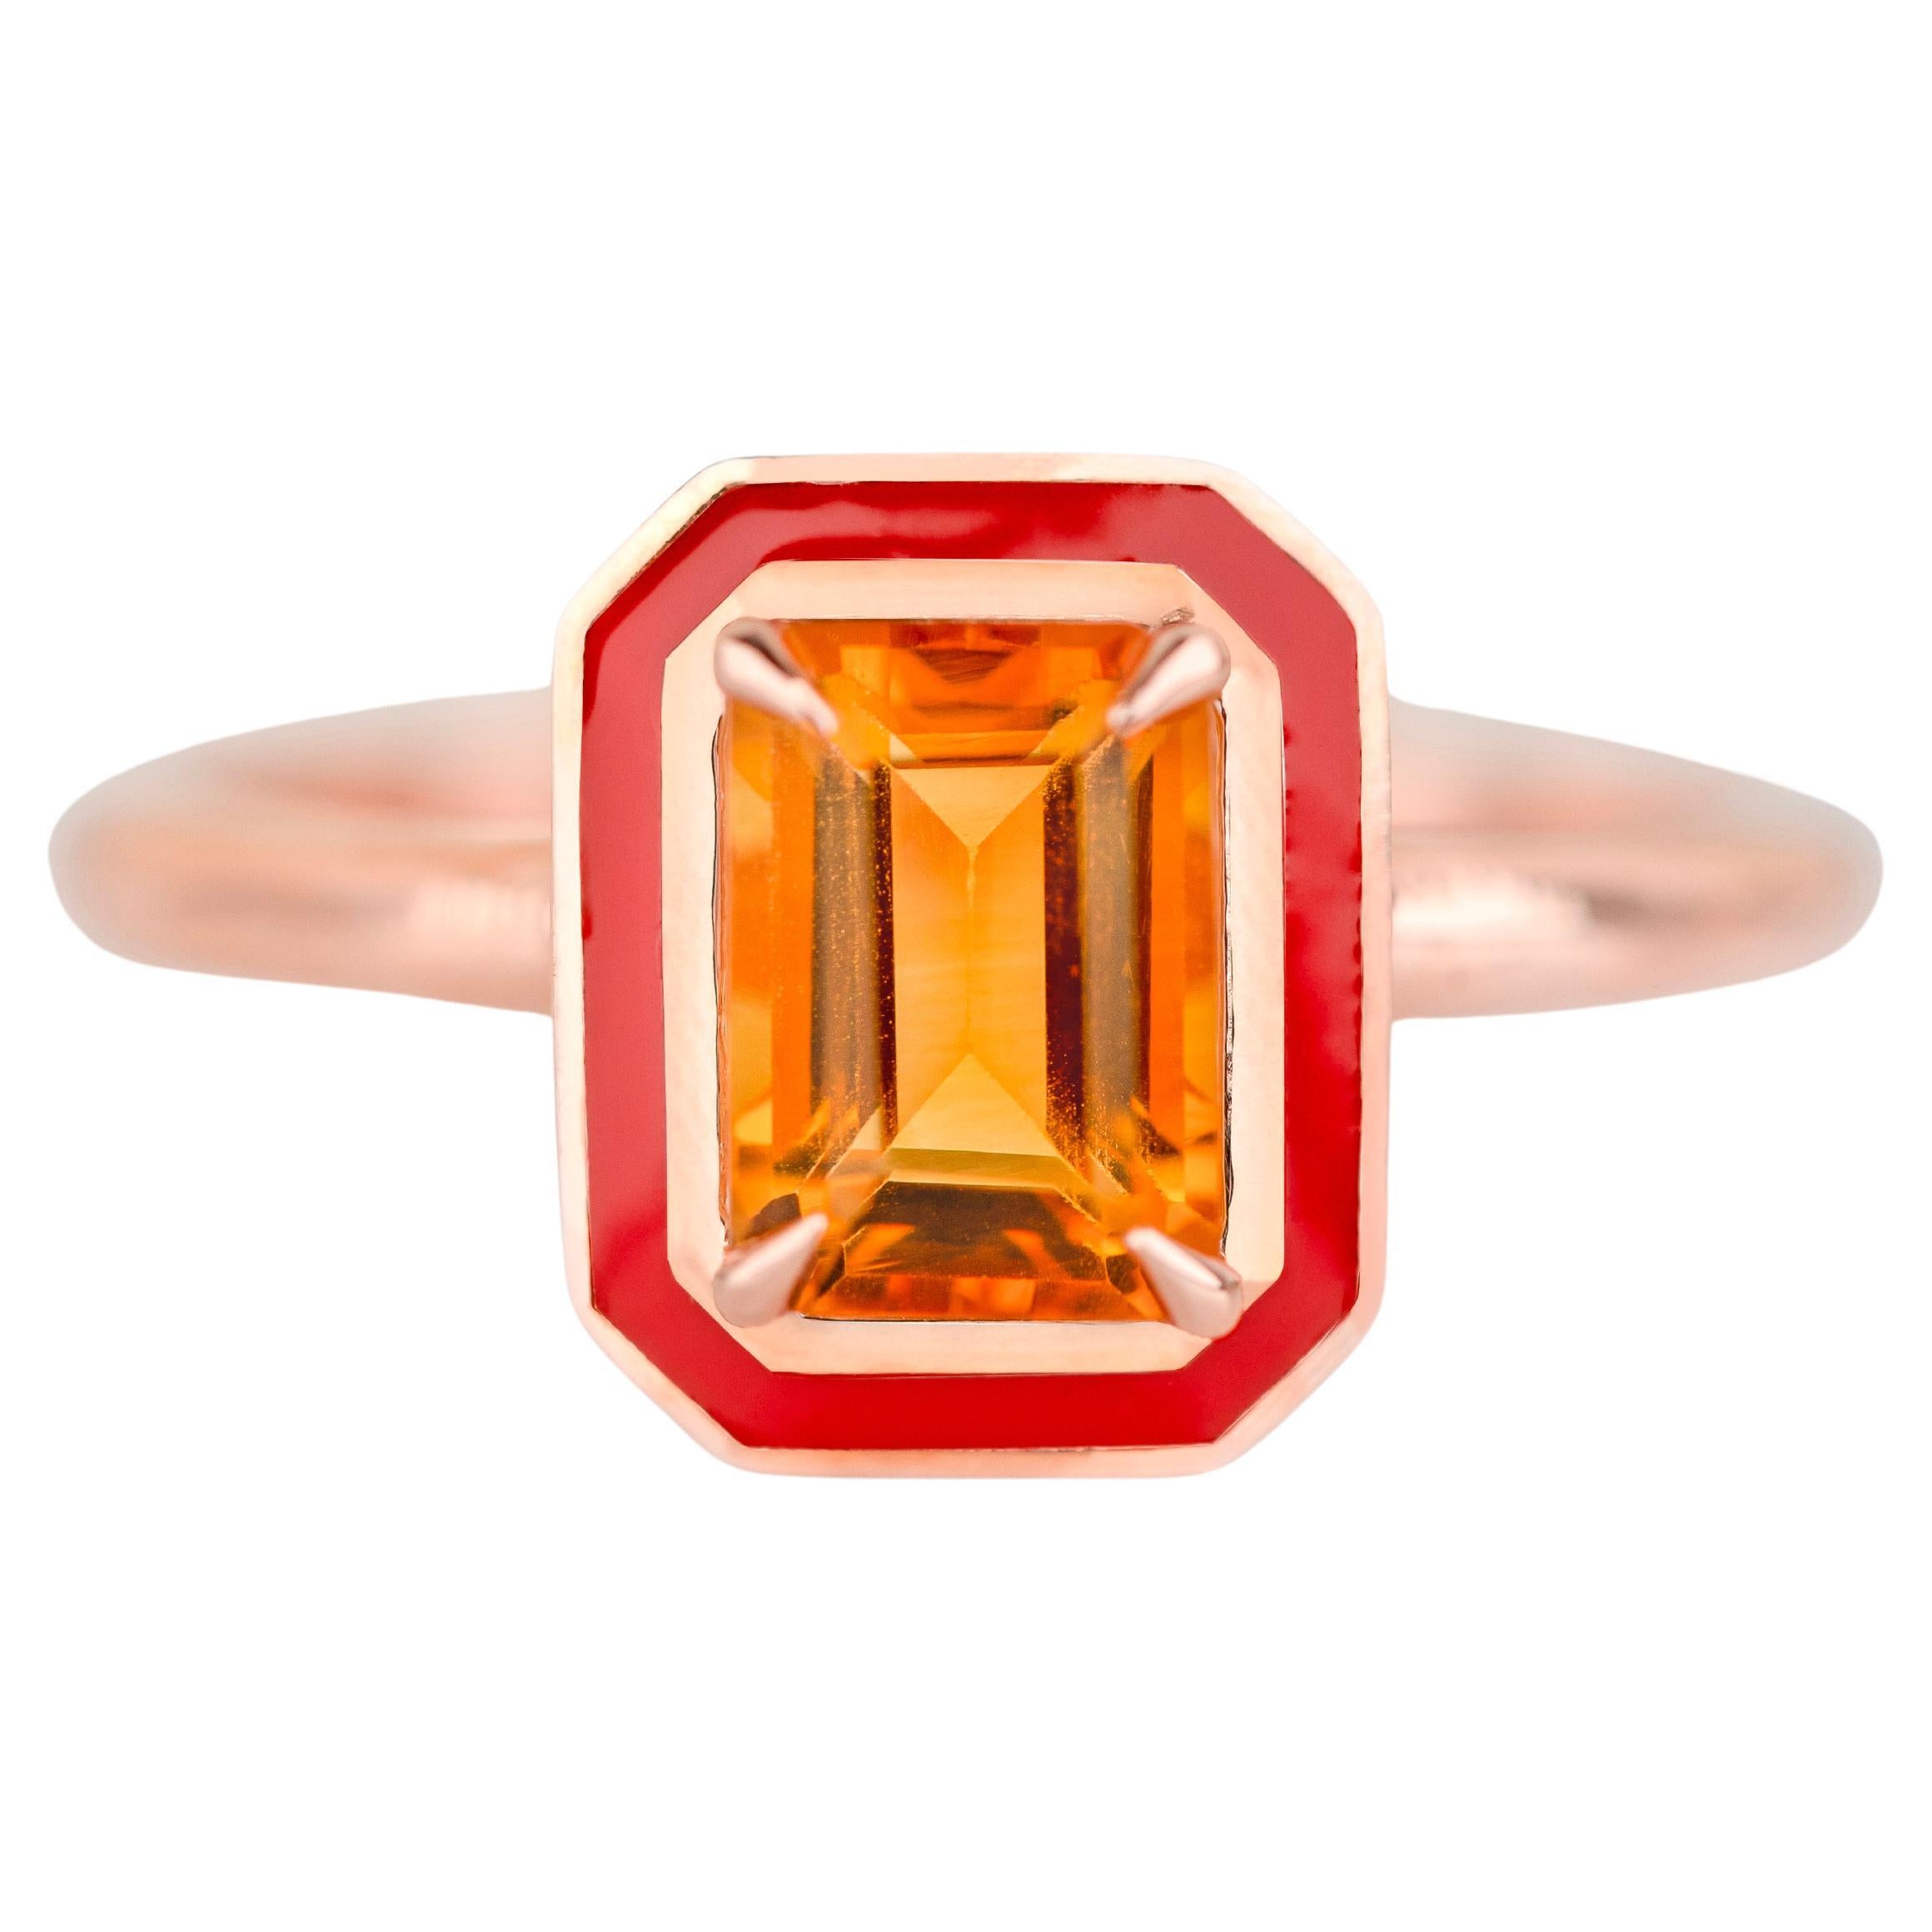 Art Deco Style, 0.90-1.00 Ct Citrine Stone and Colorful Enamel, 14K Gold Ring